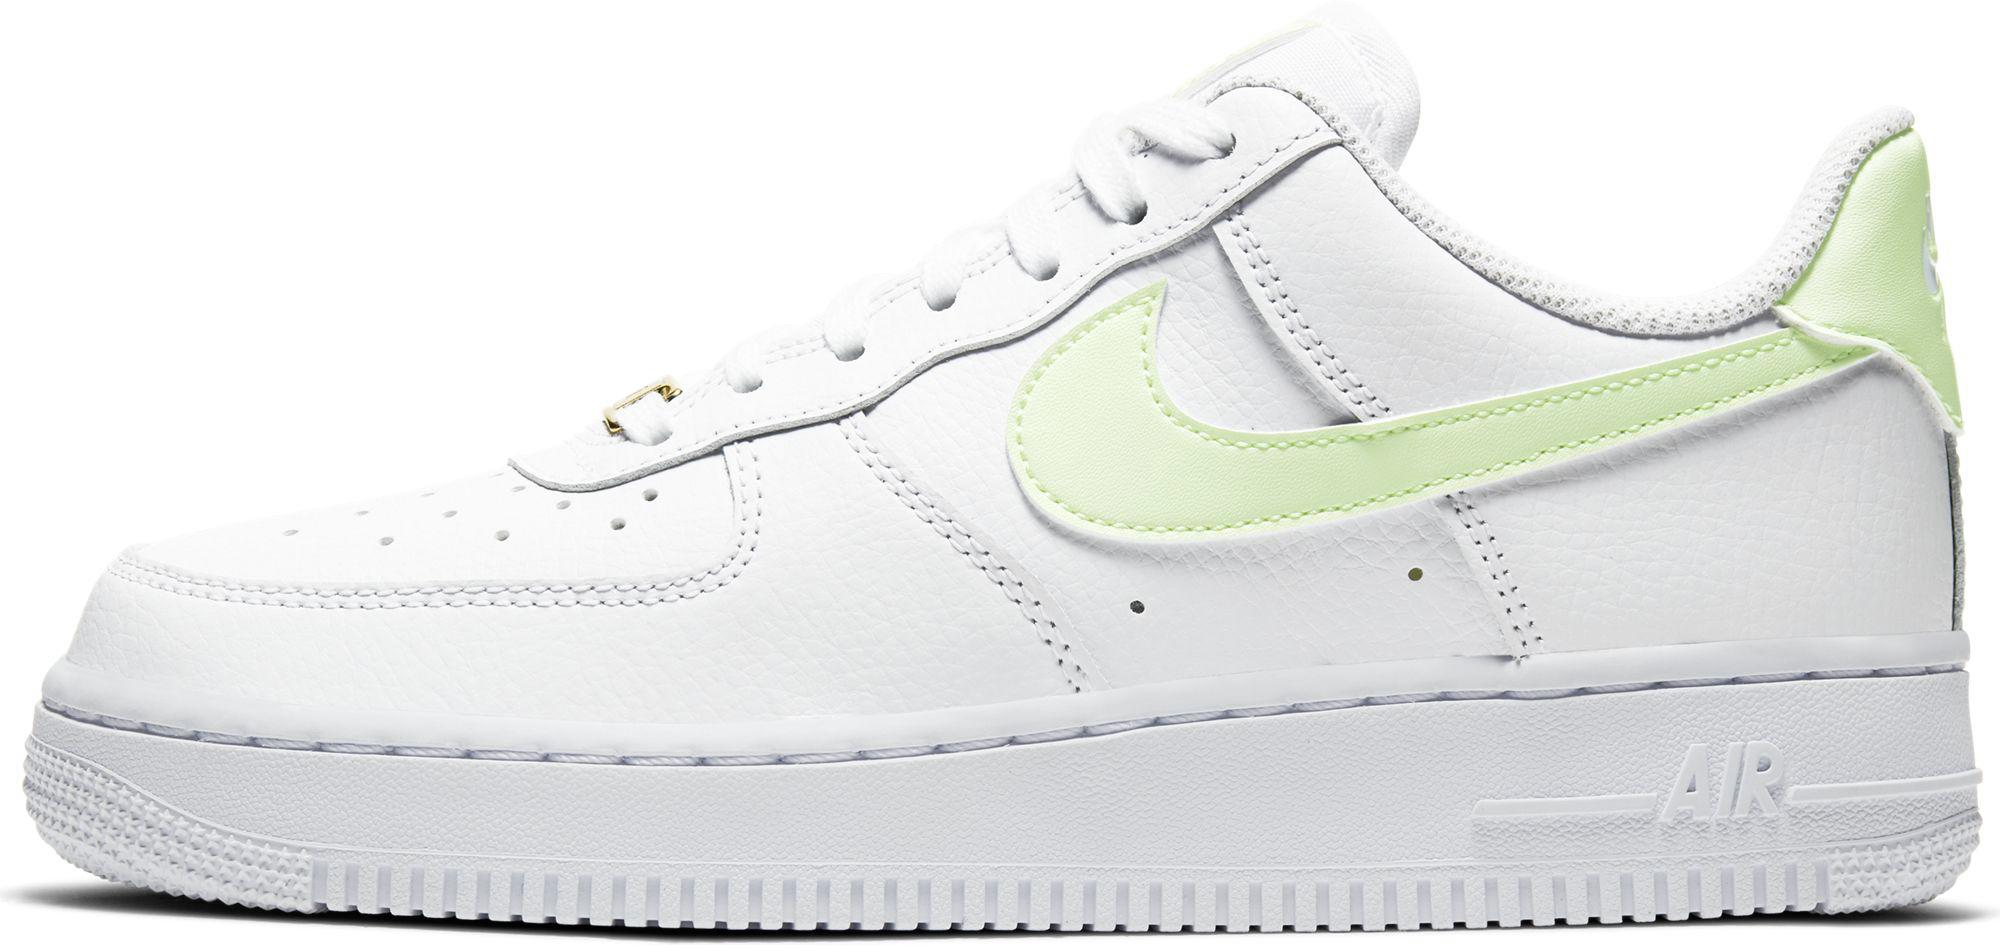 nike air force one low volt